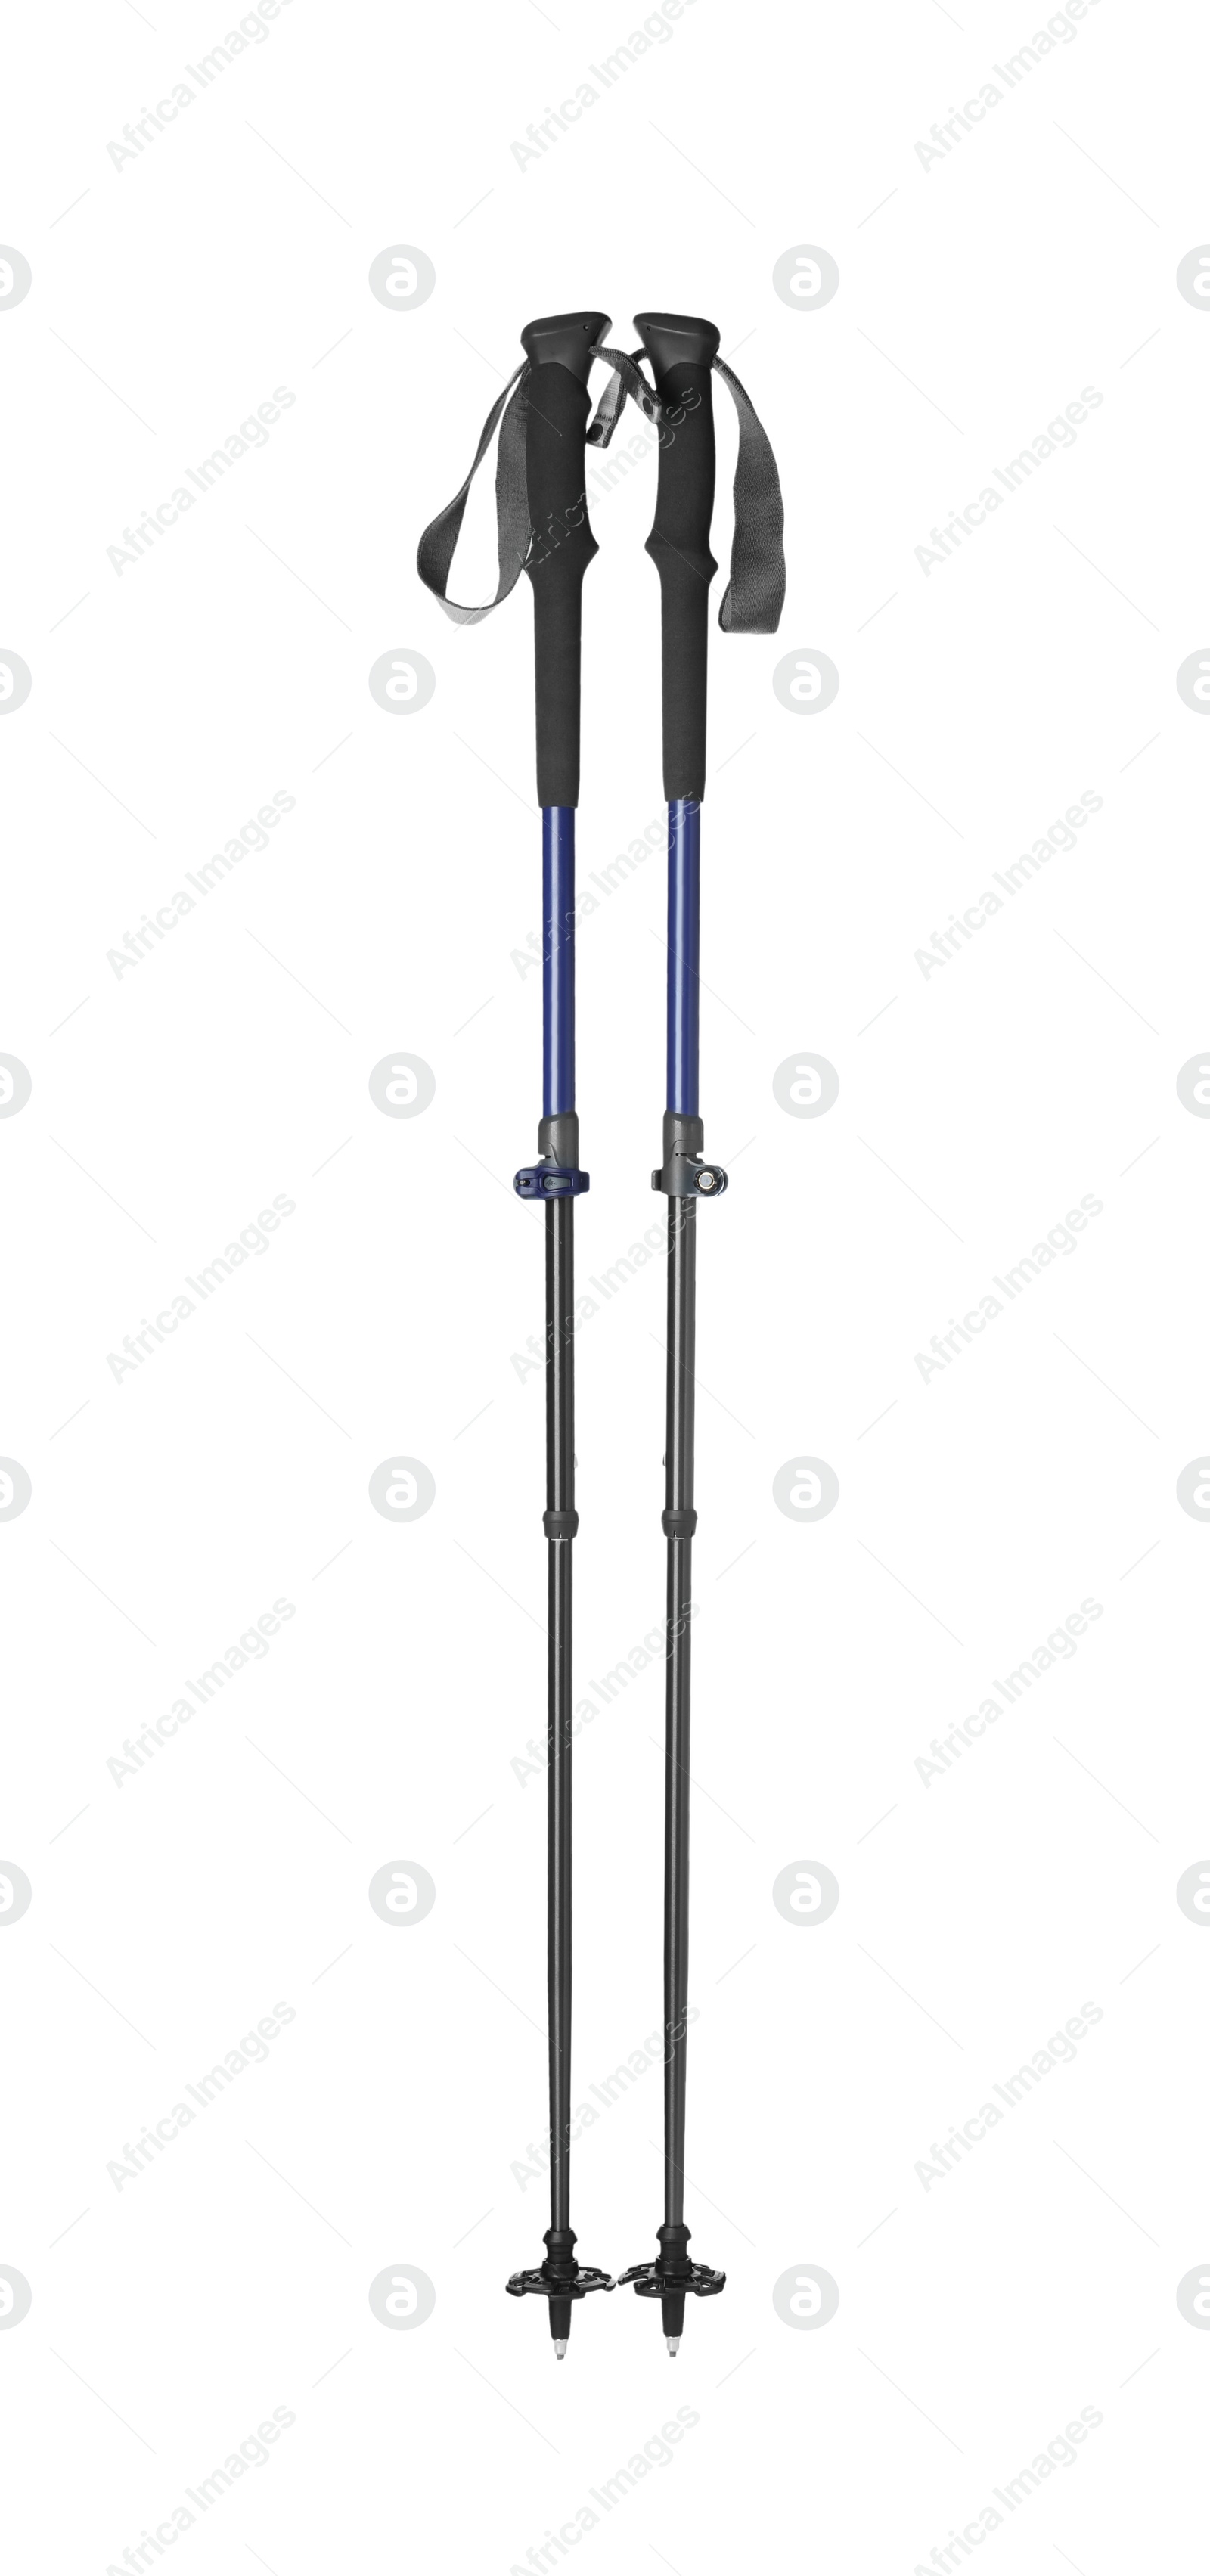 Photo of Pair of trekking poles on white background. Camping tourism